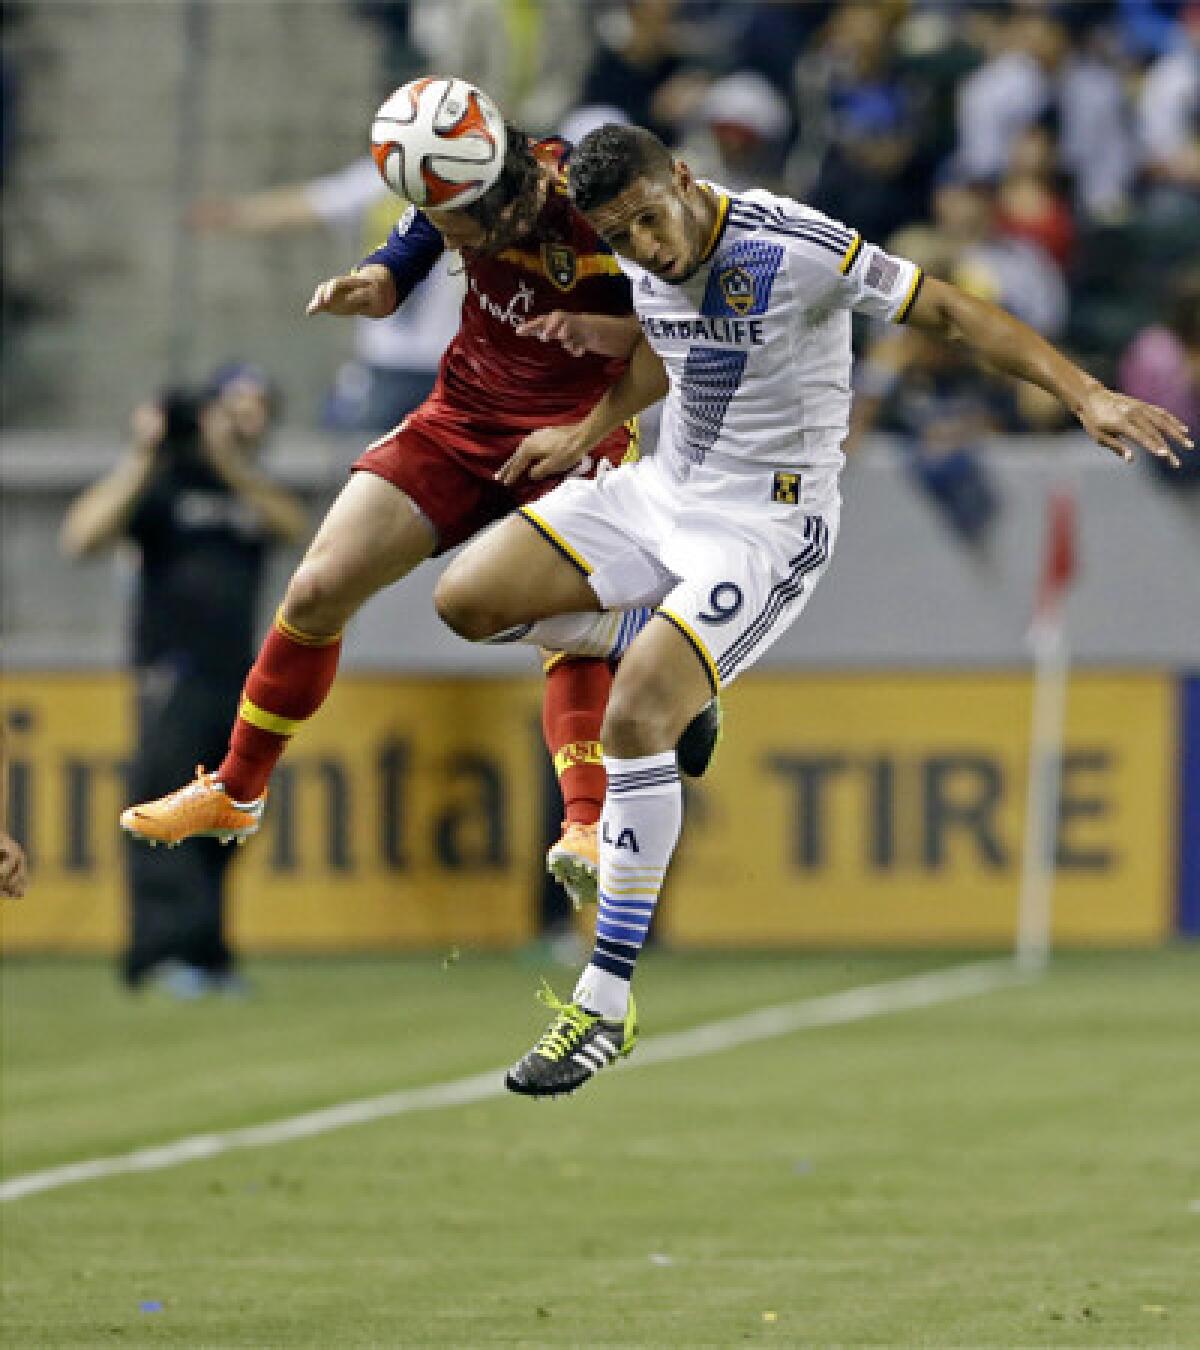 New Galaxy forward Samuel, right, goes for a header against Real Salt Lake midfielder Ned Grabavoy in Carson on Saturday night.